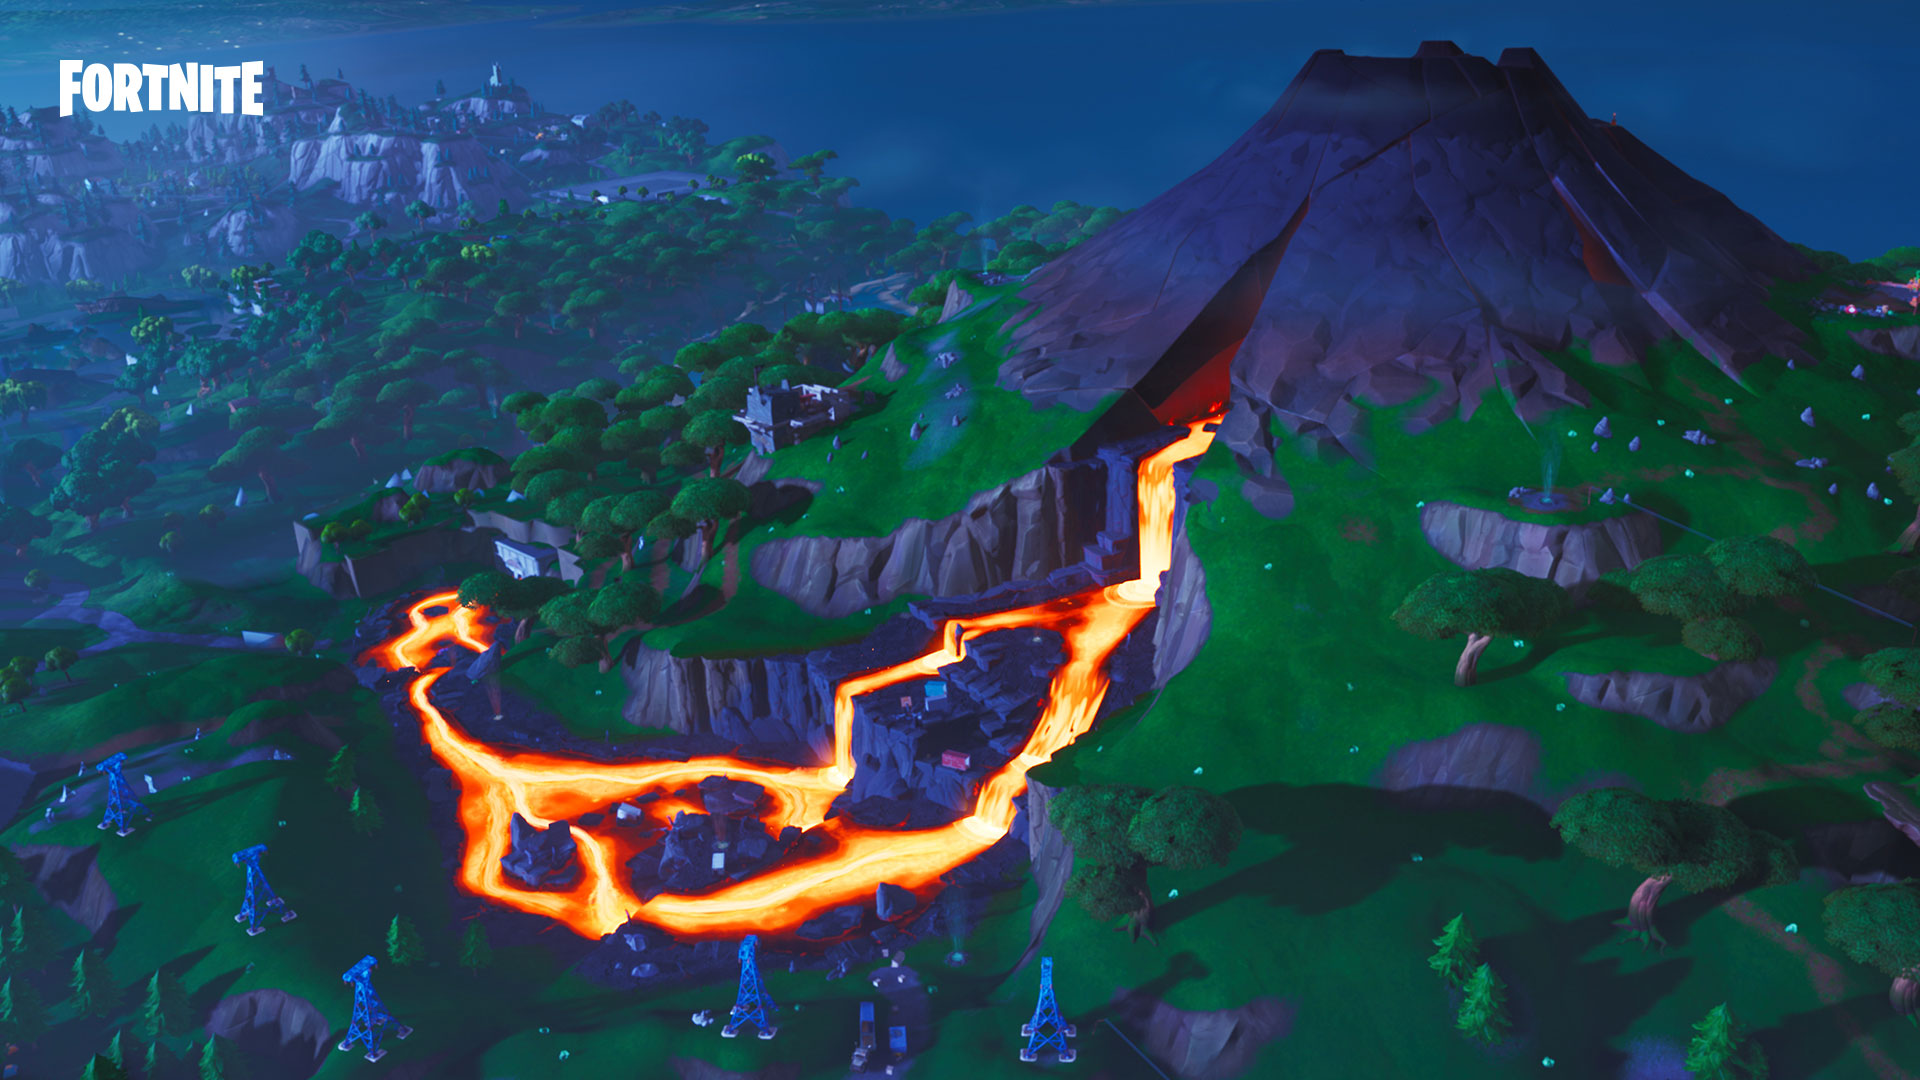 fortnite s season 8 week 5 challenges will send you near the volcano - fortnite gain shields from mushrooms